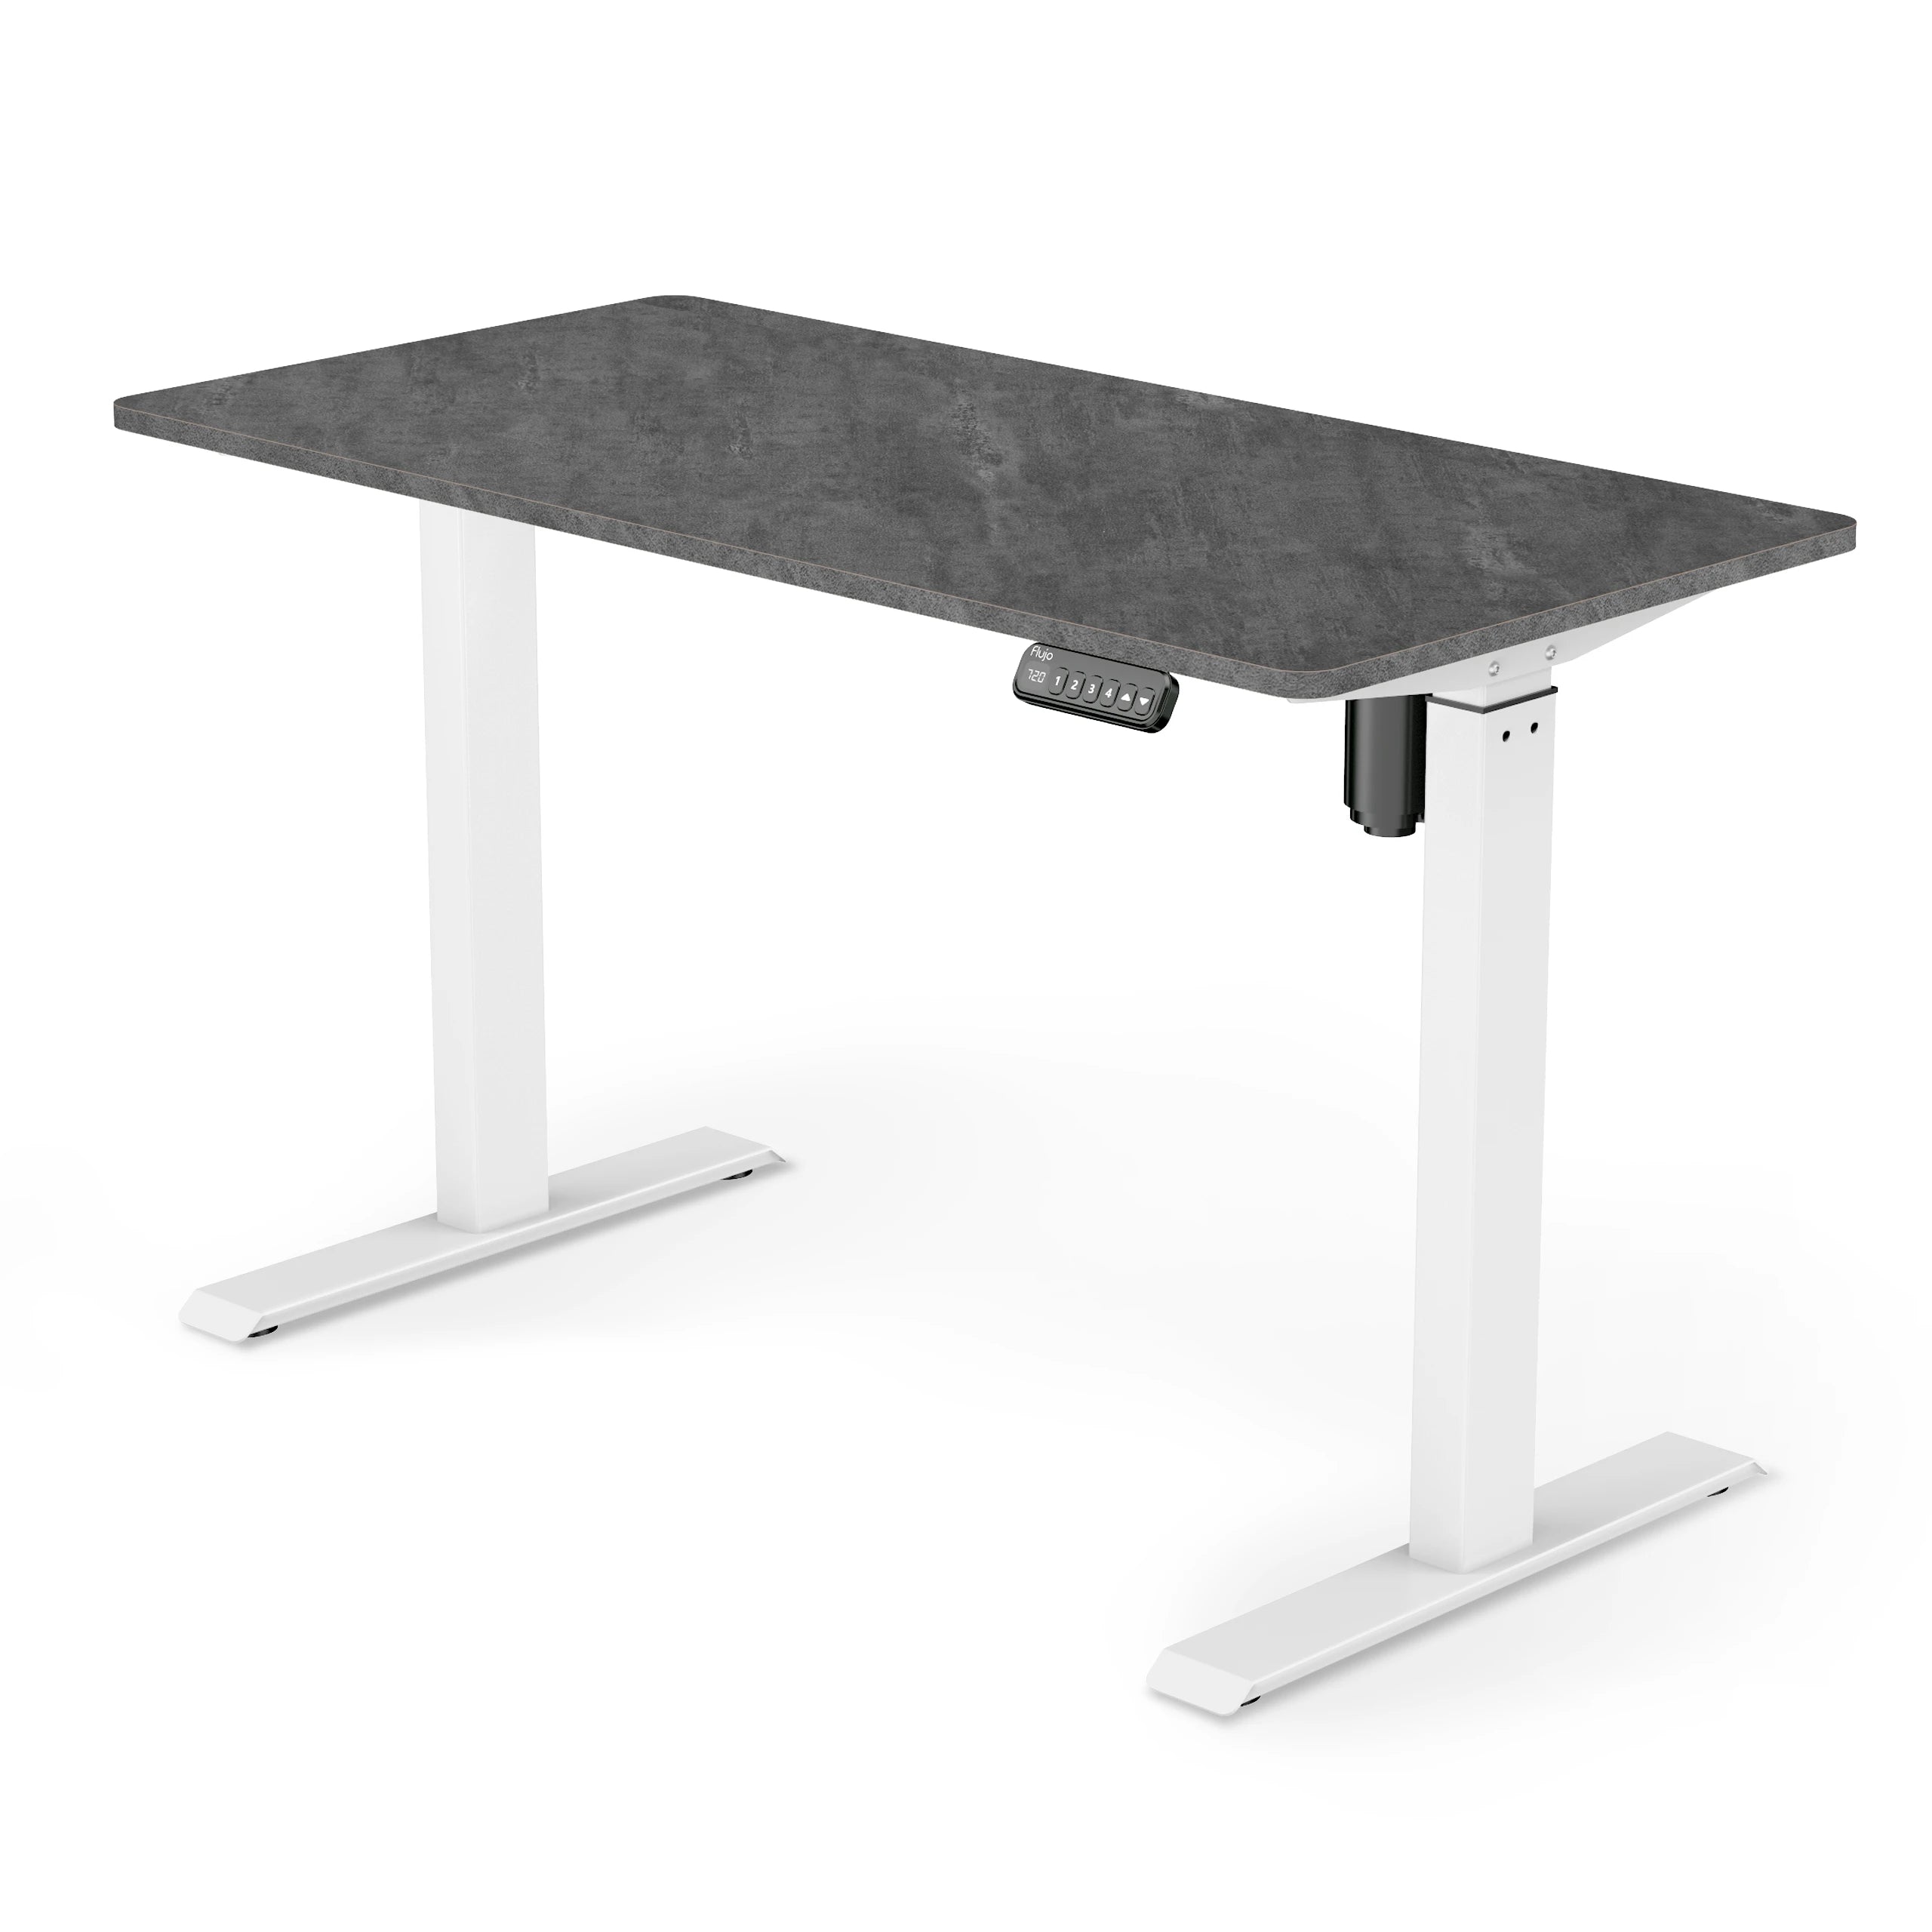 SmarTrax Ergonomic Standing Desk featuring a Rock Grey wood finish and white frame, complete with programmable height settings for a comfortable standing work experience.